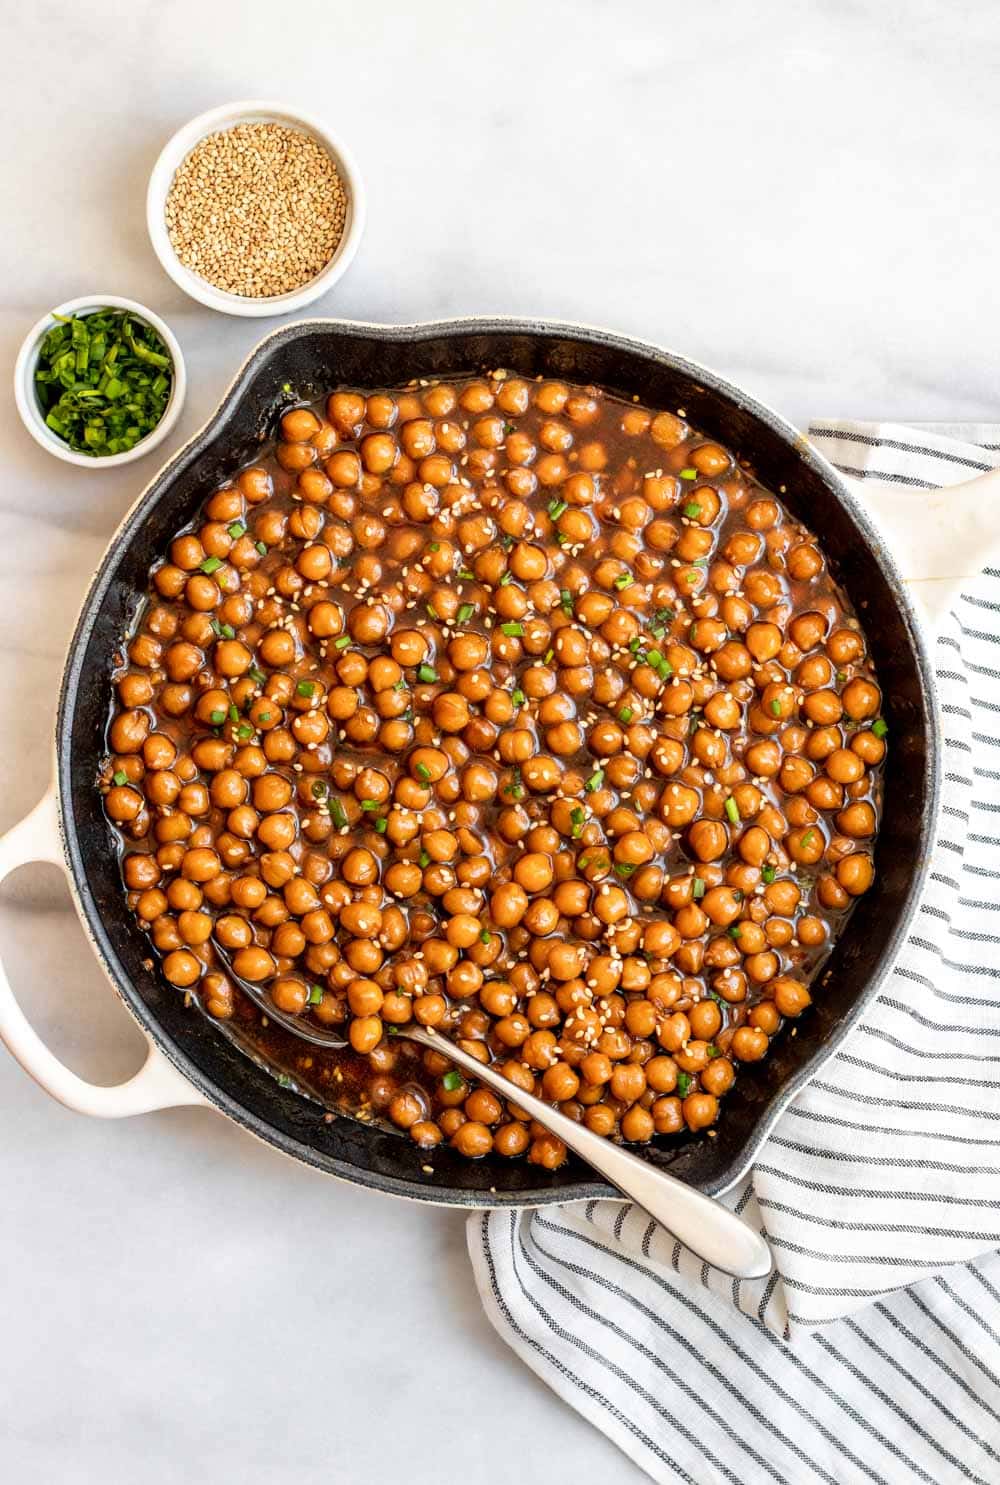 Easy chickpea recipe with chives and sesame seeds on top.